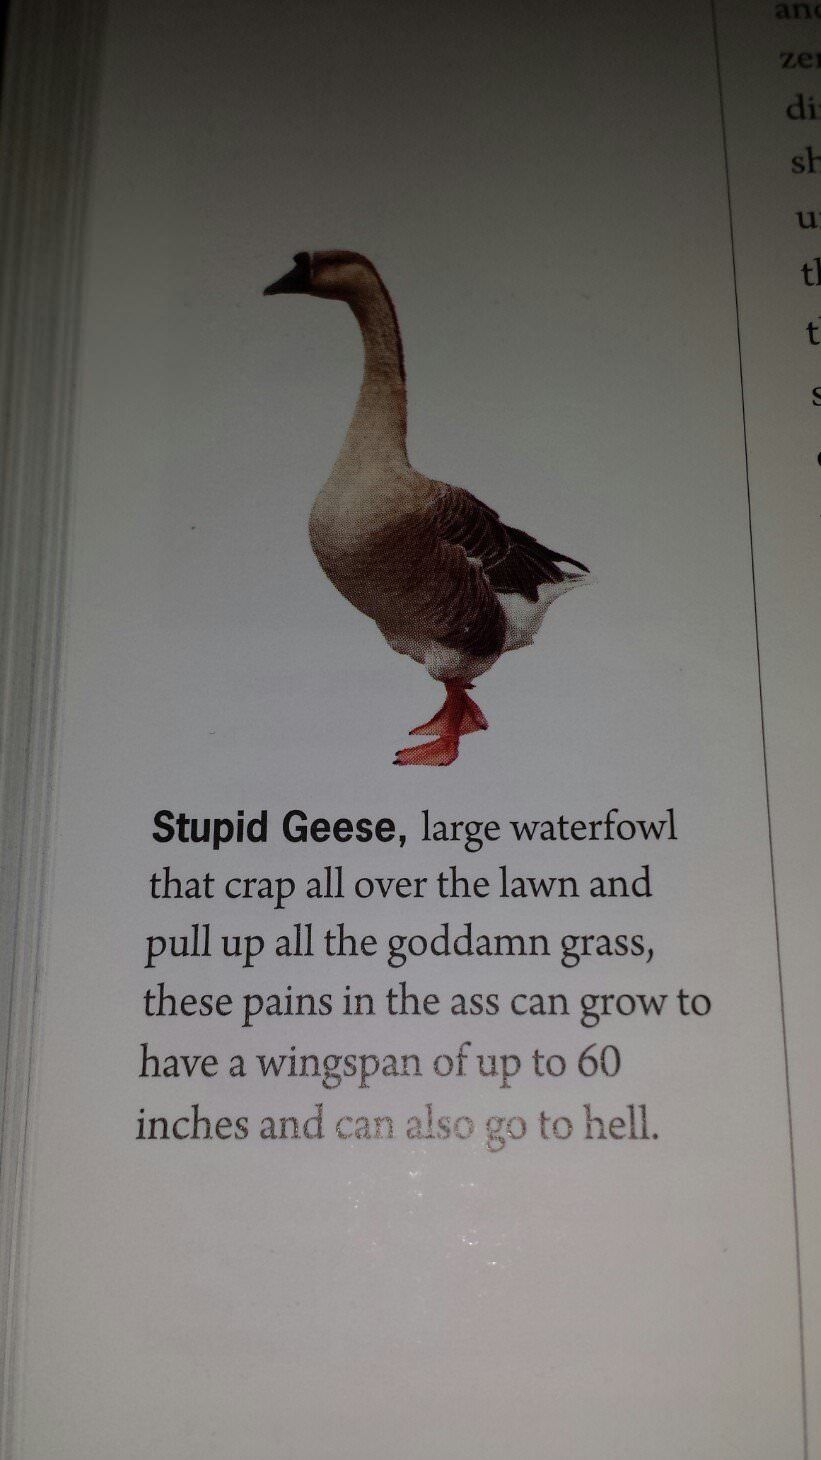 The real truth about geese.